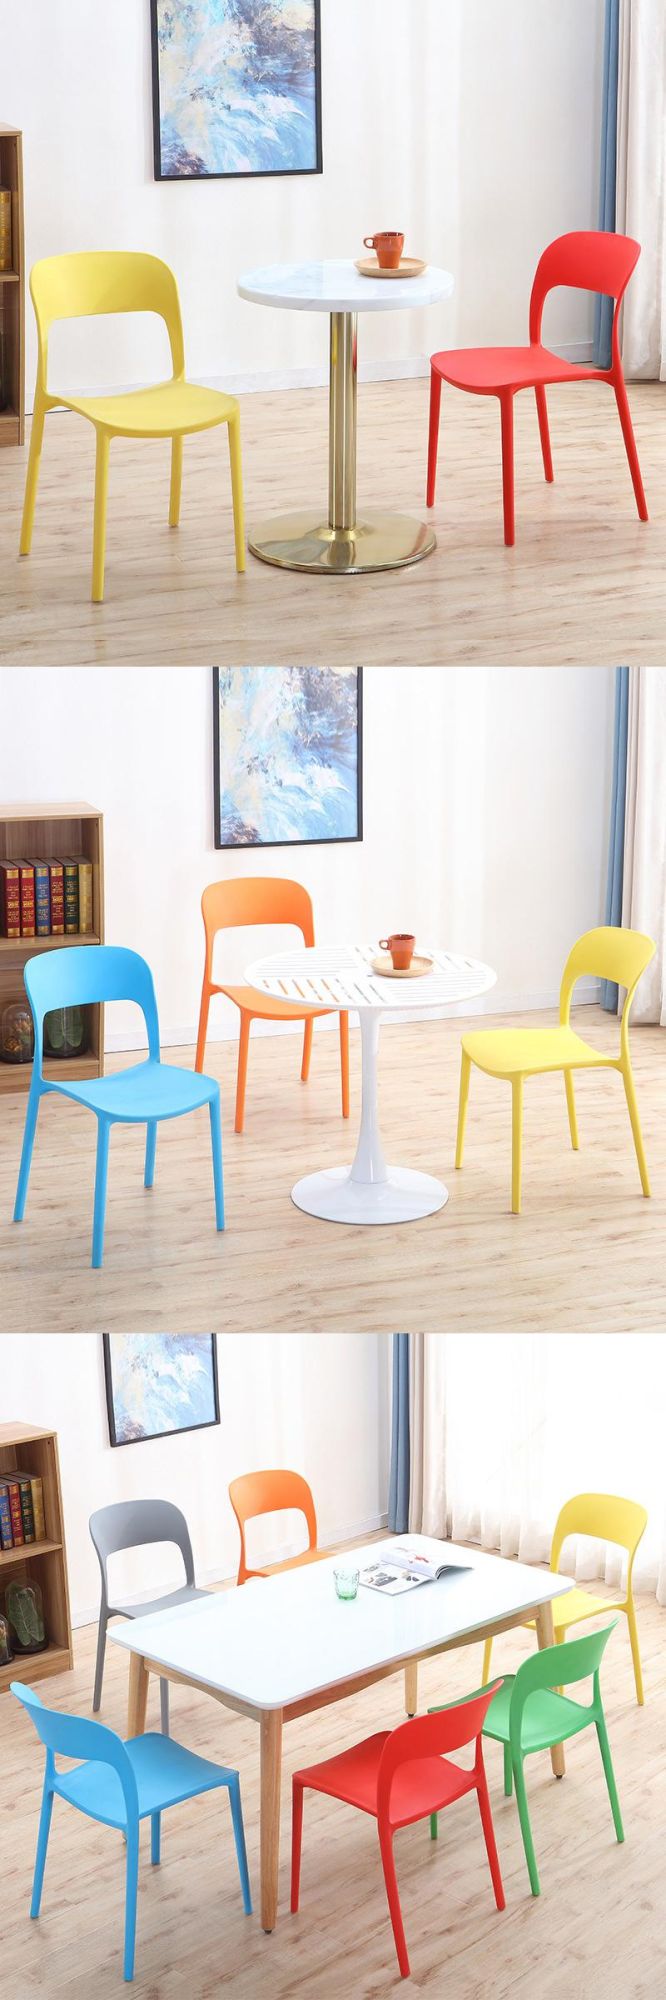 Outdoor Garden Furniture PP Colorful Plastic Stacking Chair for Banquet Party